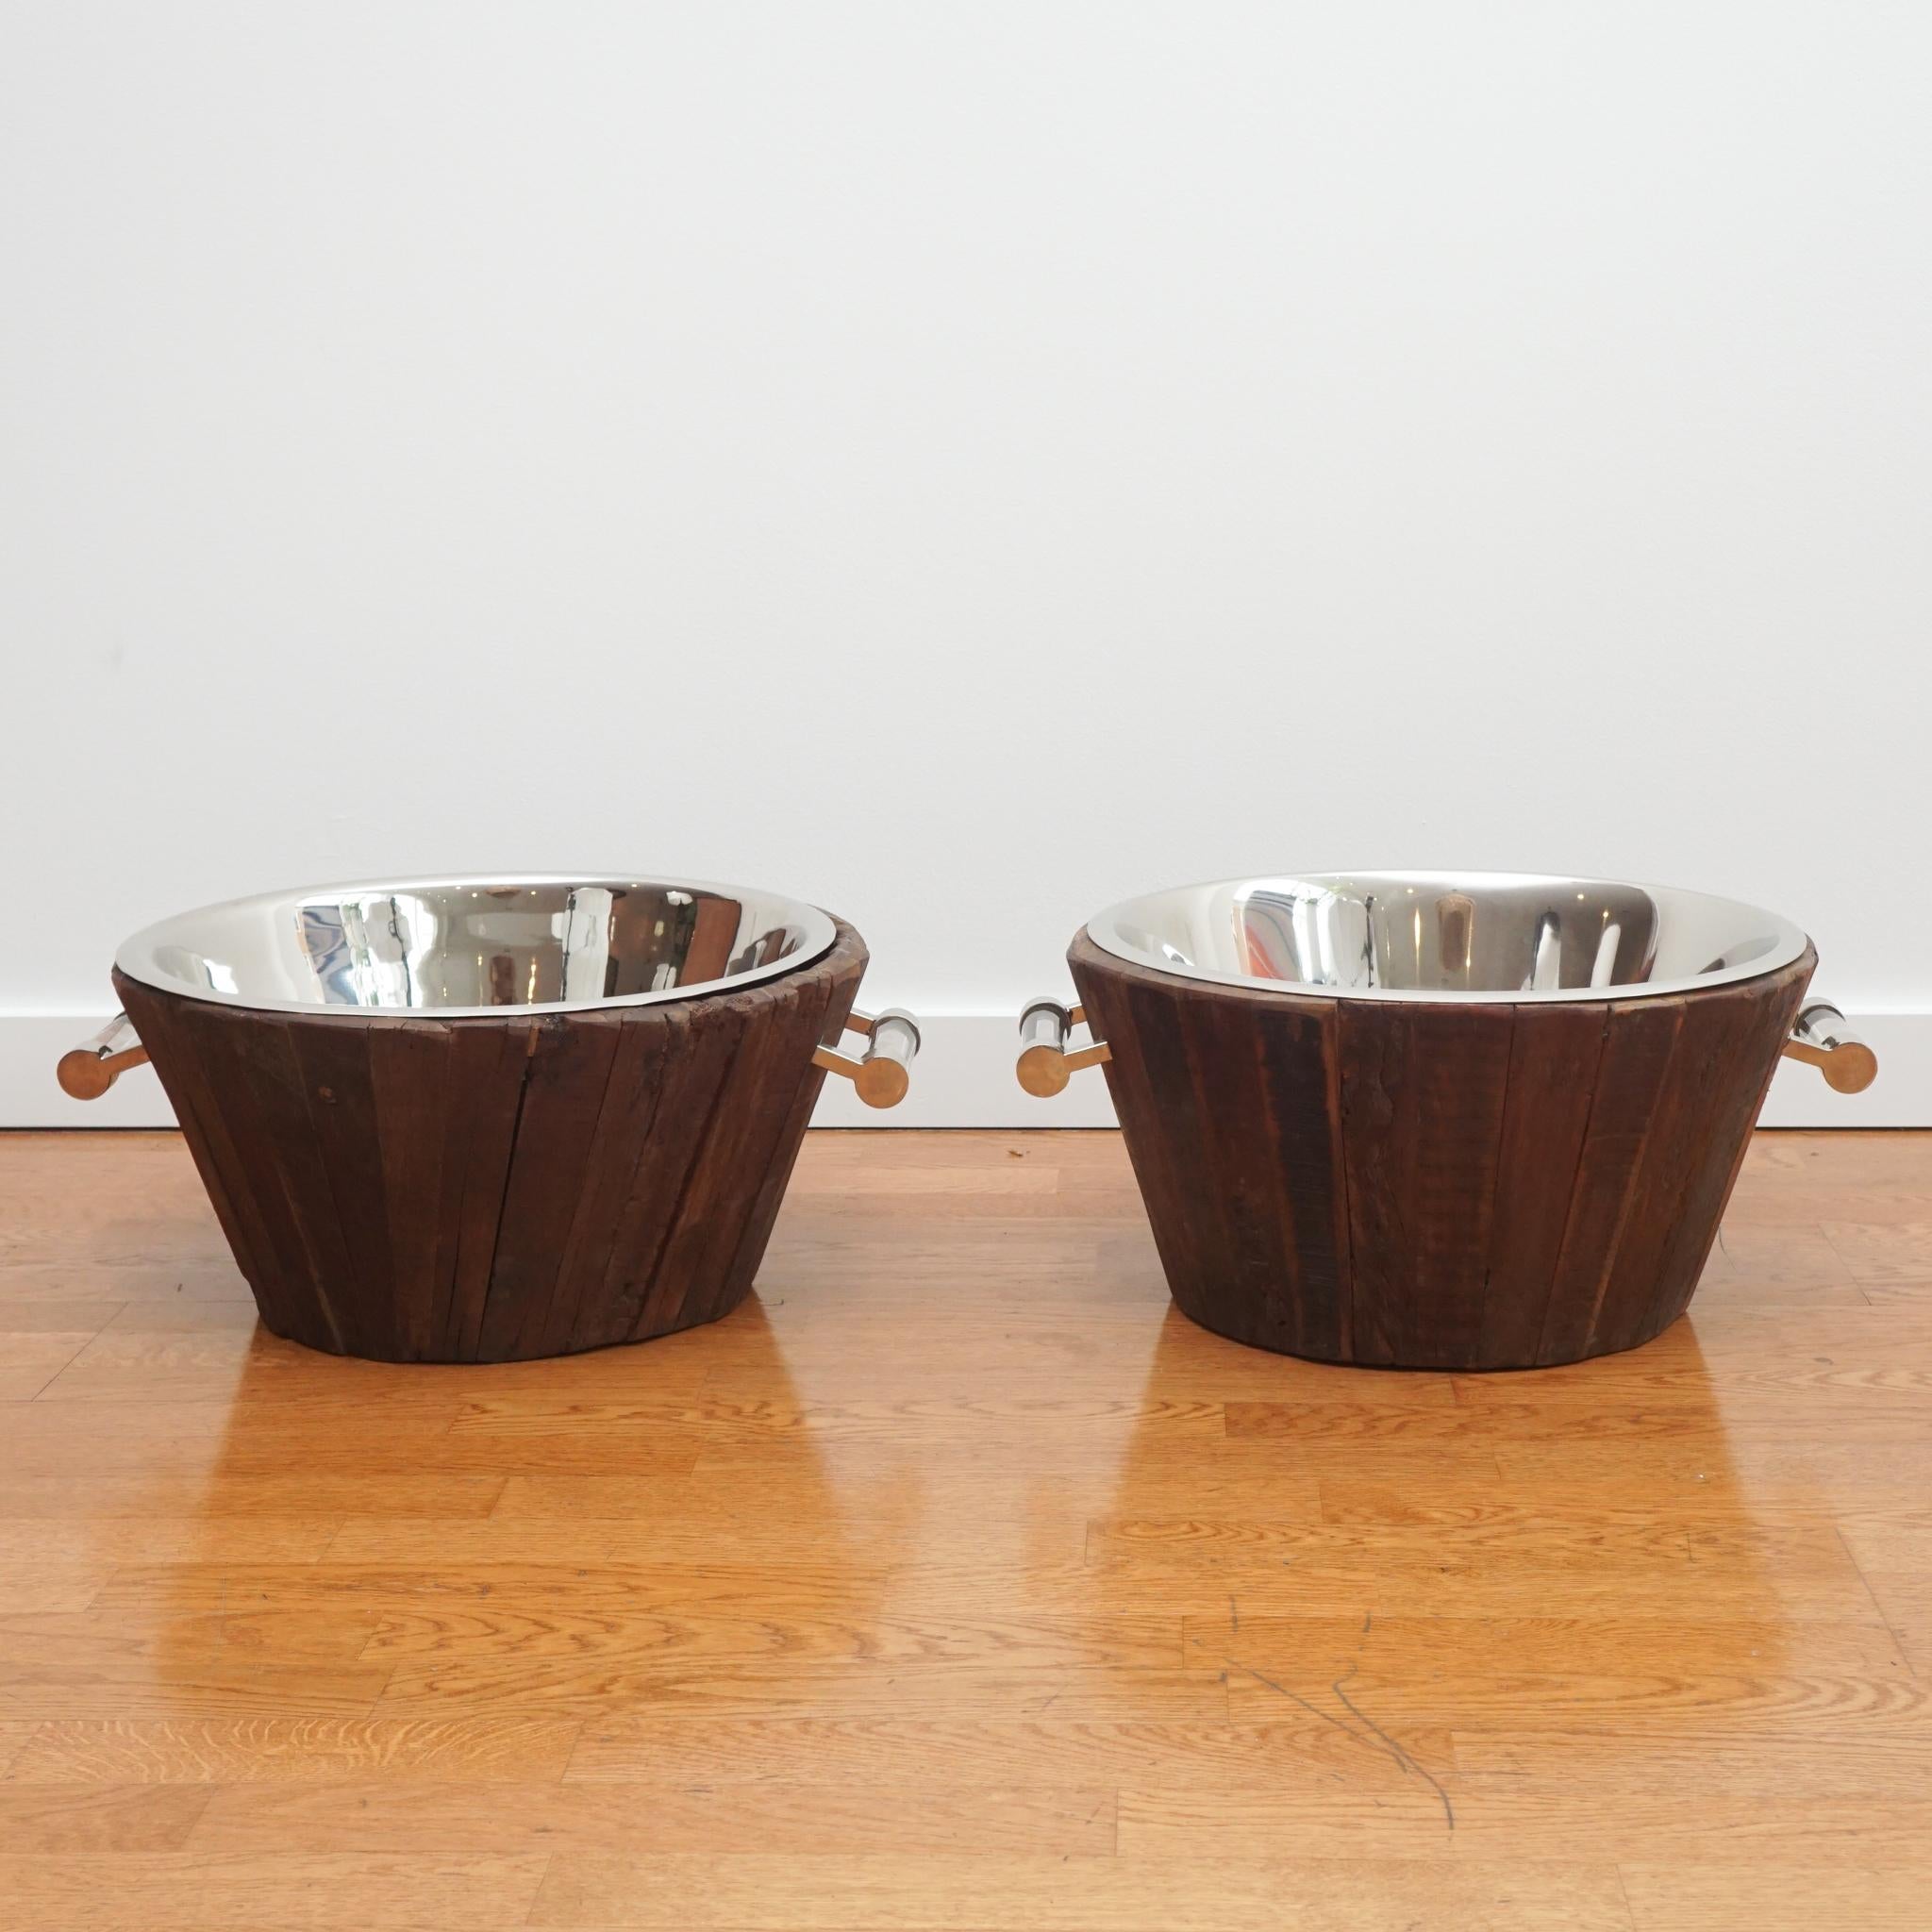 North American Teak Planters with Metal Inserts For Sale